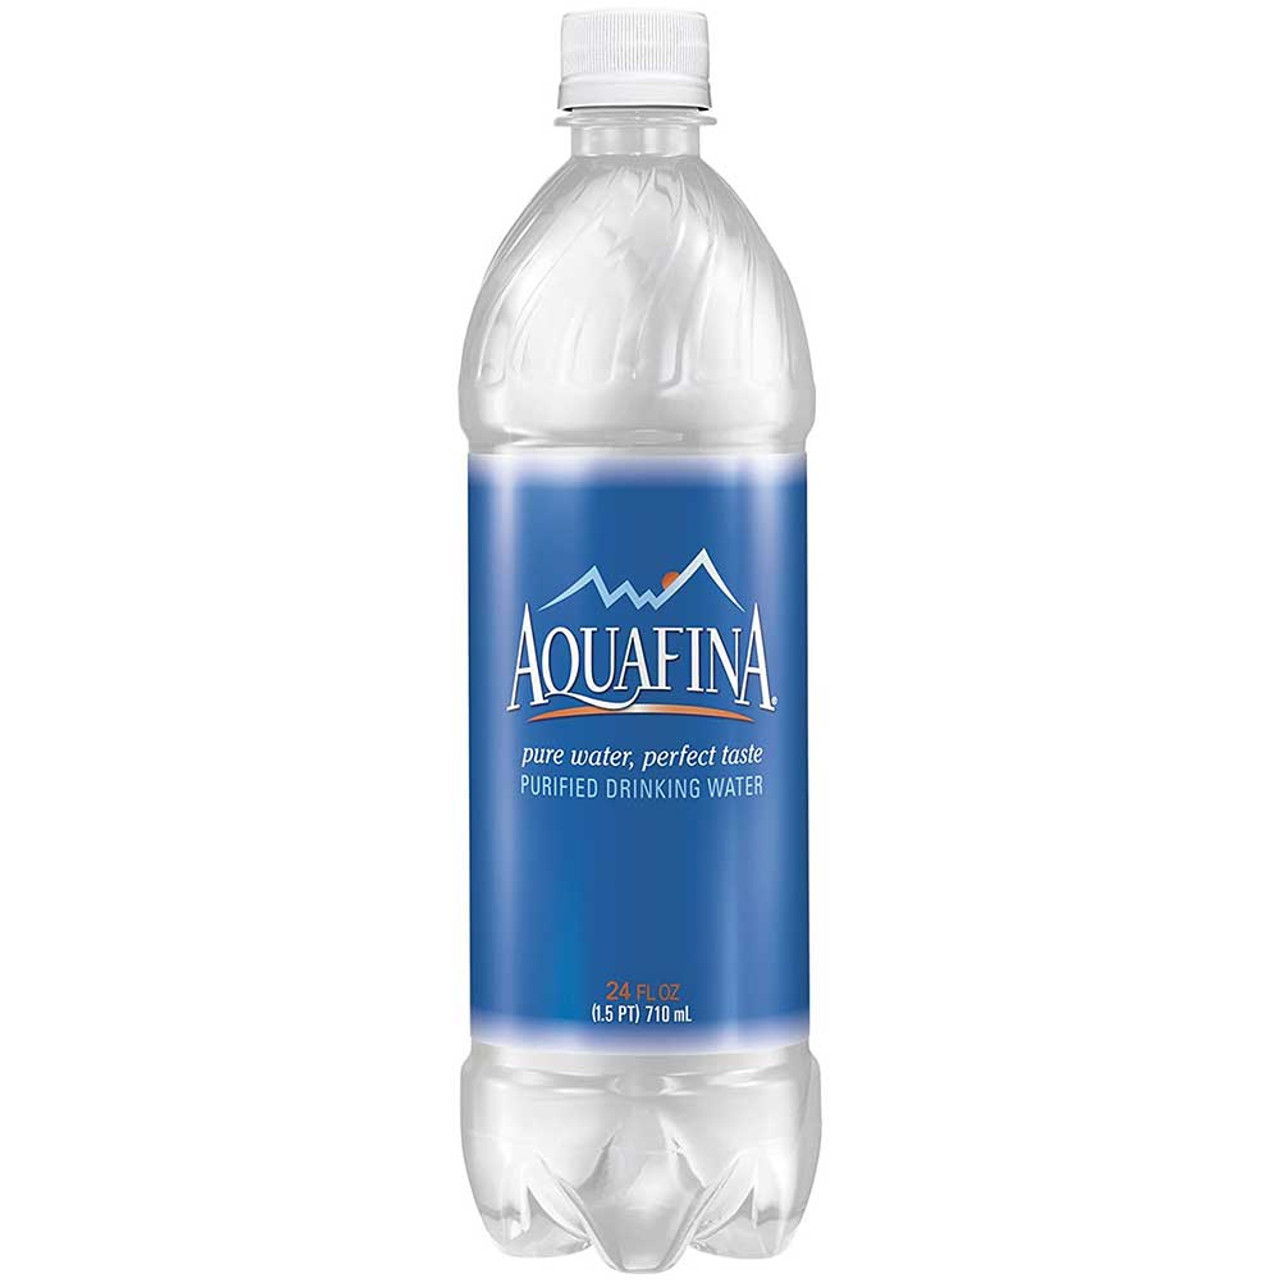 https://cdn11.bigcommerce.com/s-1n8r405nxd/images/stencil/1280x1280/products/8118/20612/25240-F1-Aquafina-Water-Bottle-Diversion-Safe-Product-Front__84915.1634648158.jpg?c=2